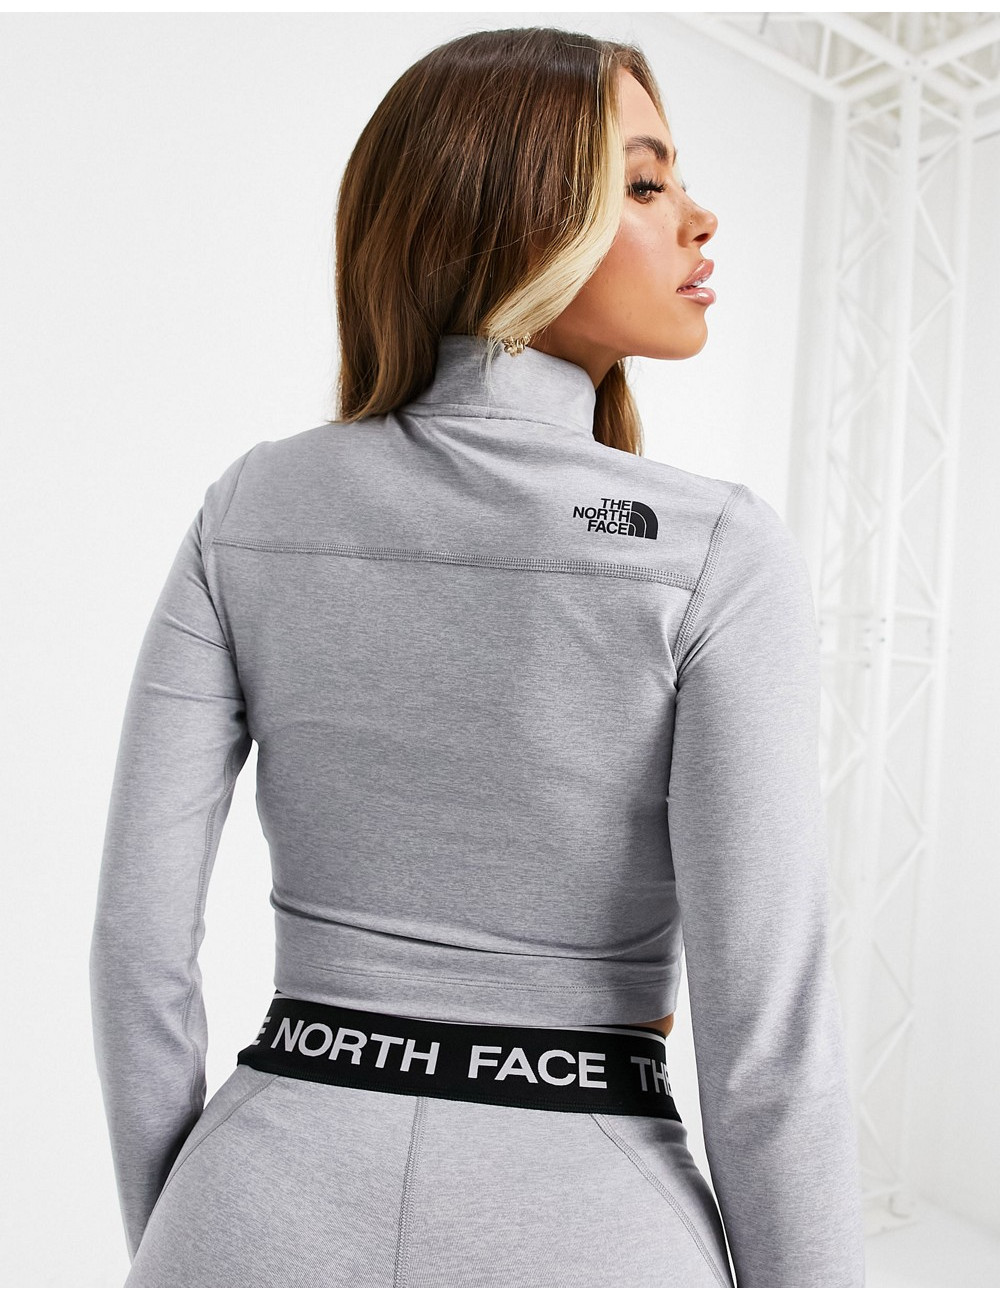 The North Face 1/4 zip...